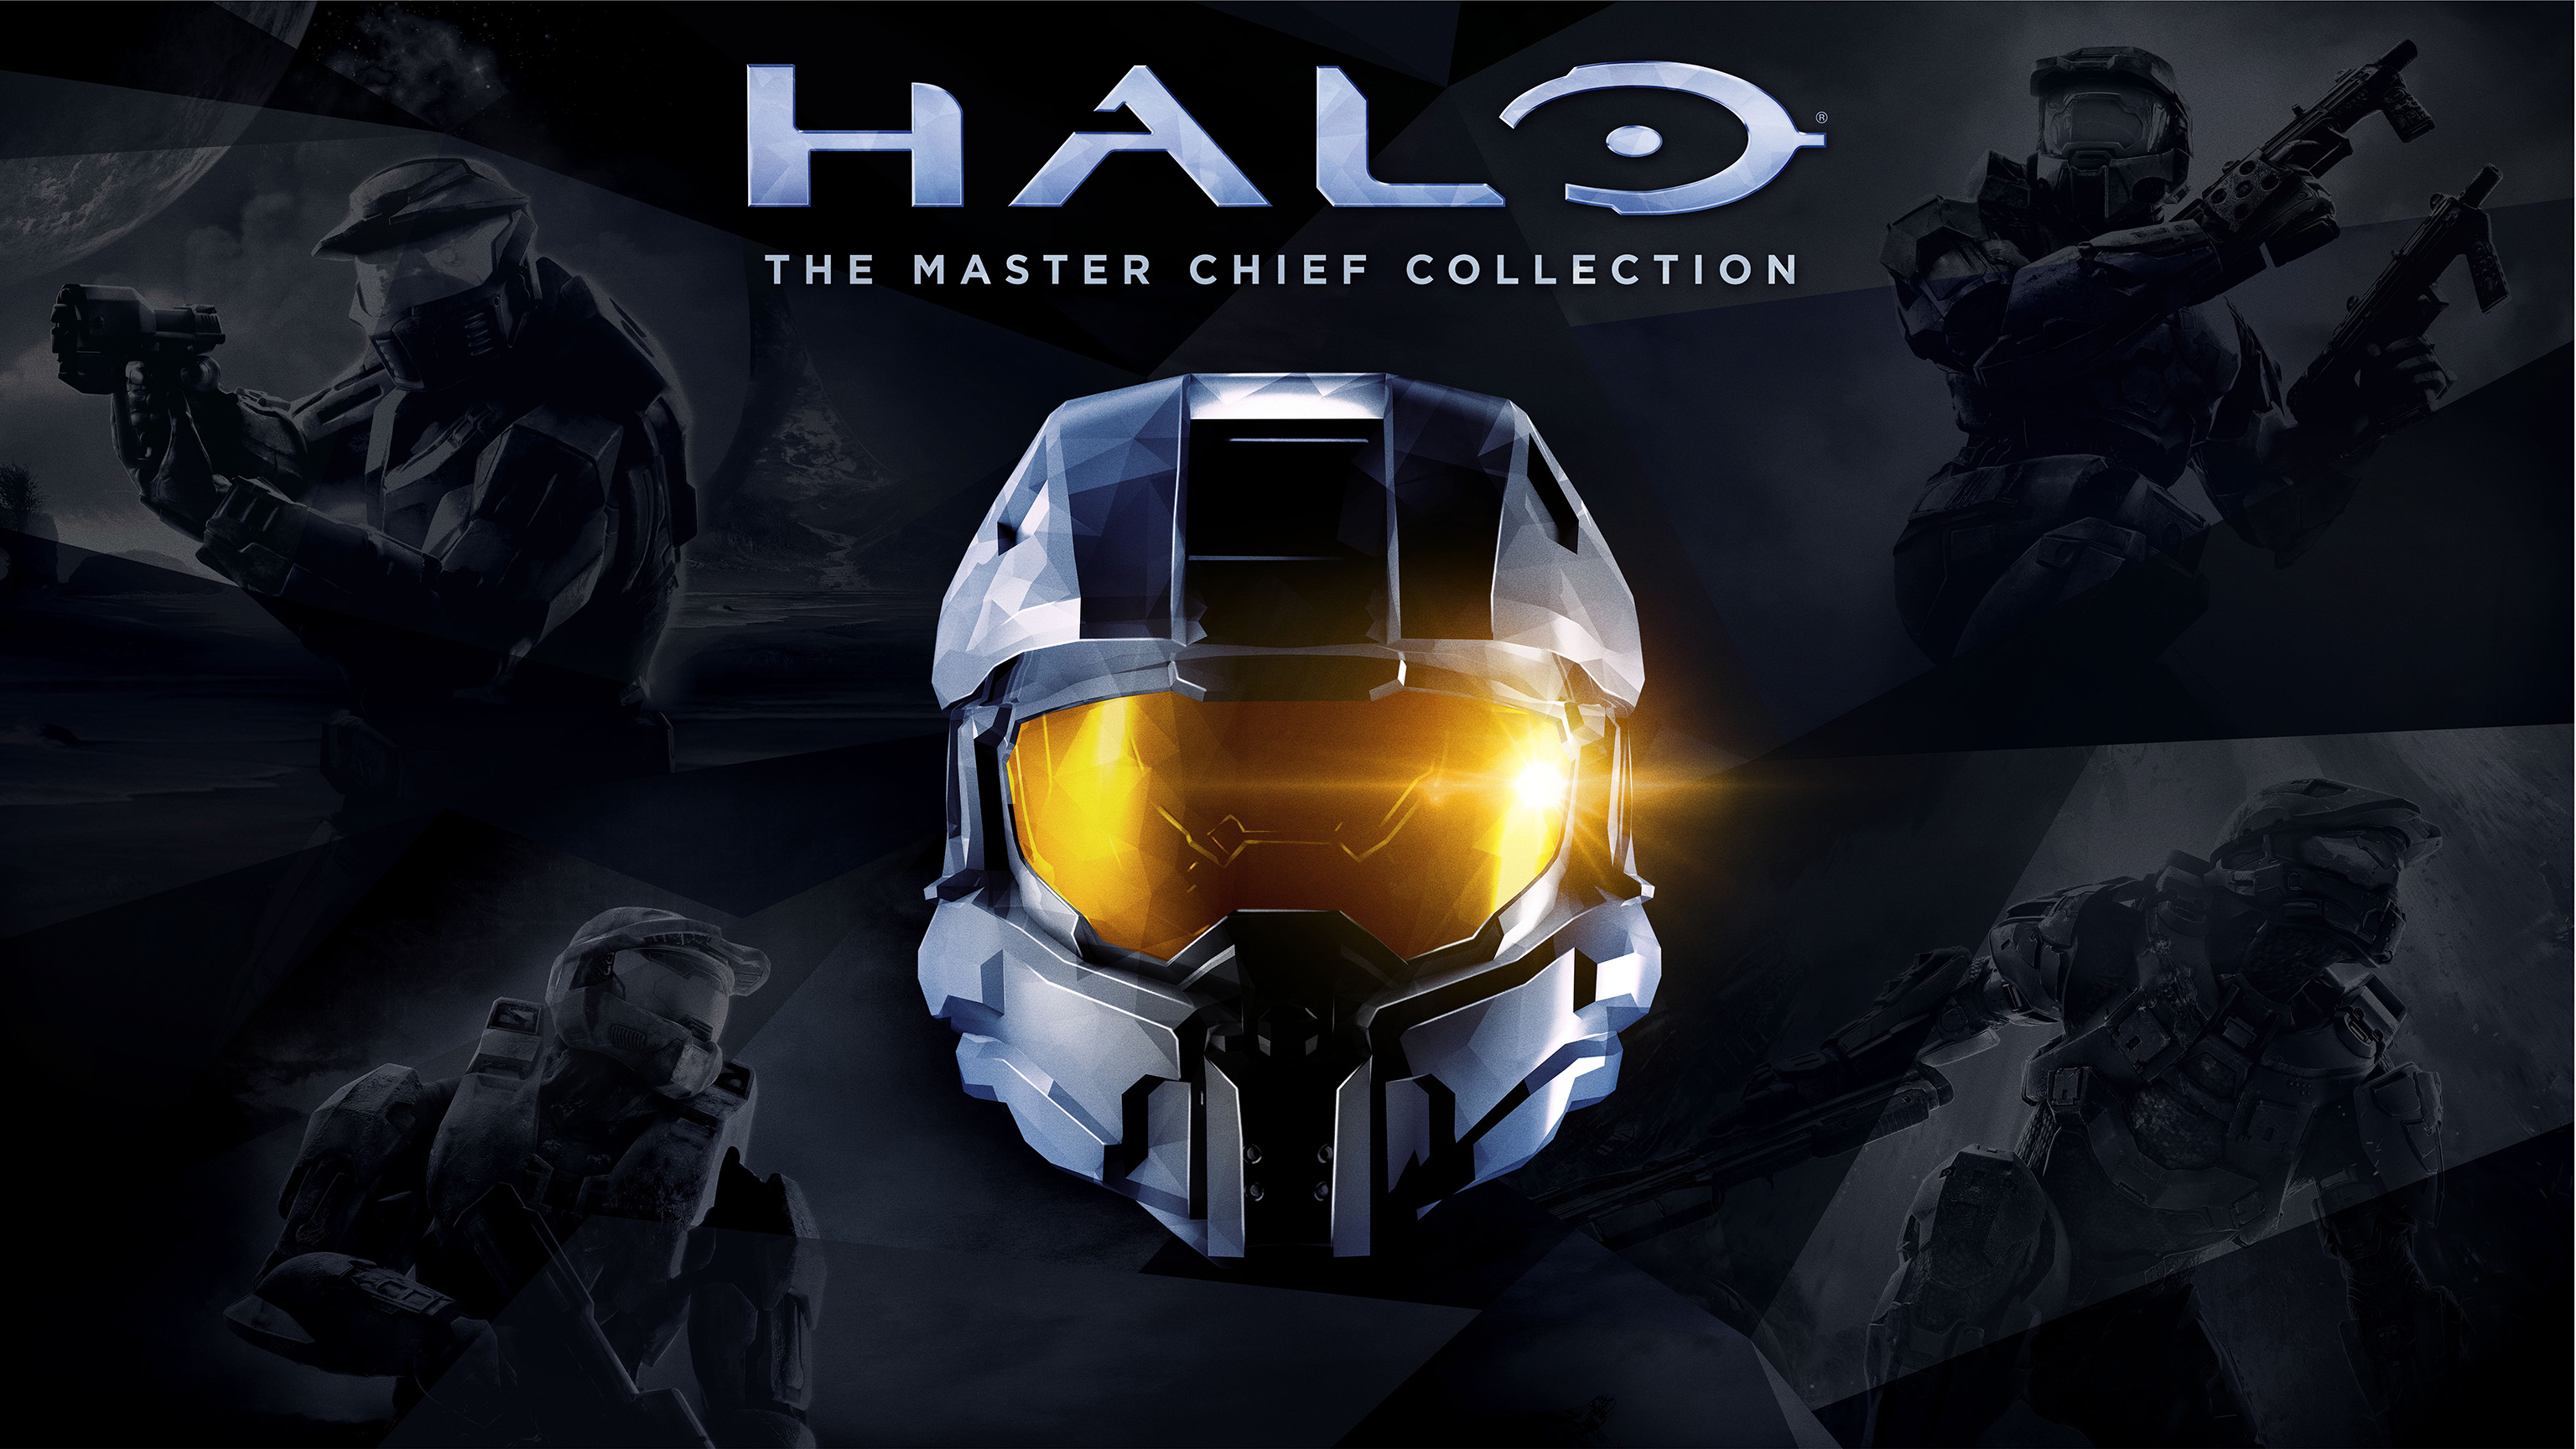 Halo 3 Terminal Locations – Halo: The Master Chief Collection Guide